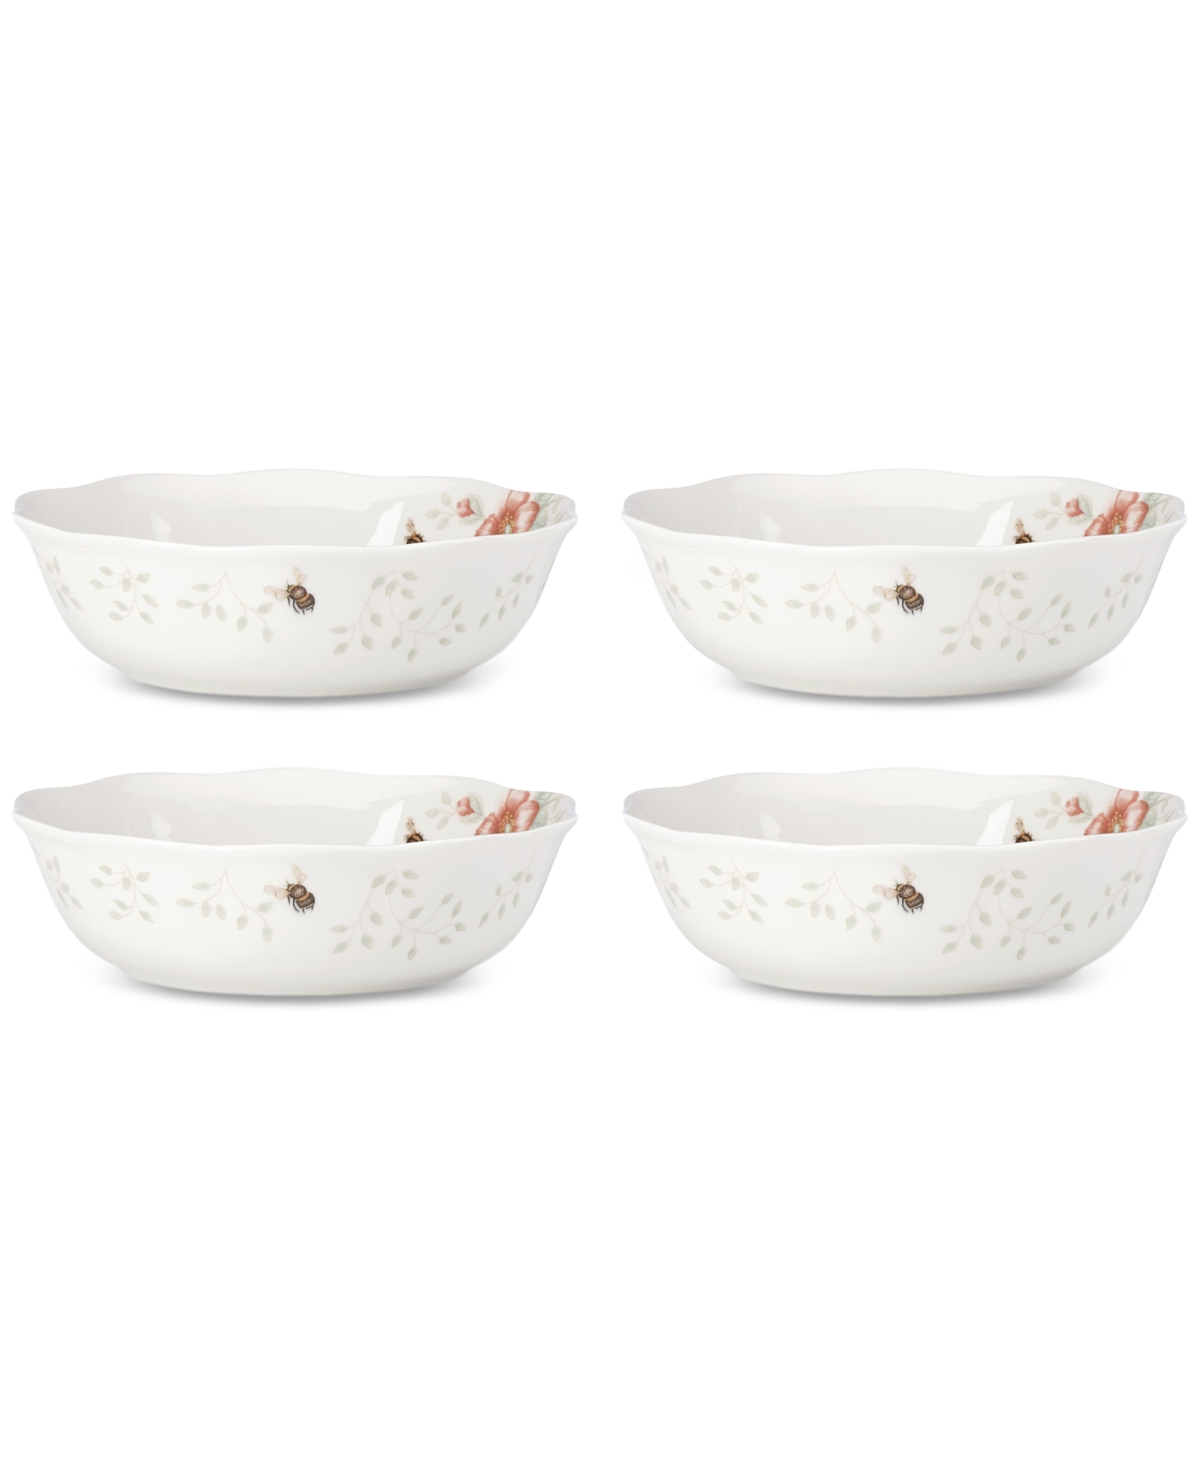 Butterfly Meadow Bowls, Set of 4 - Multi And White